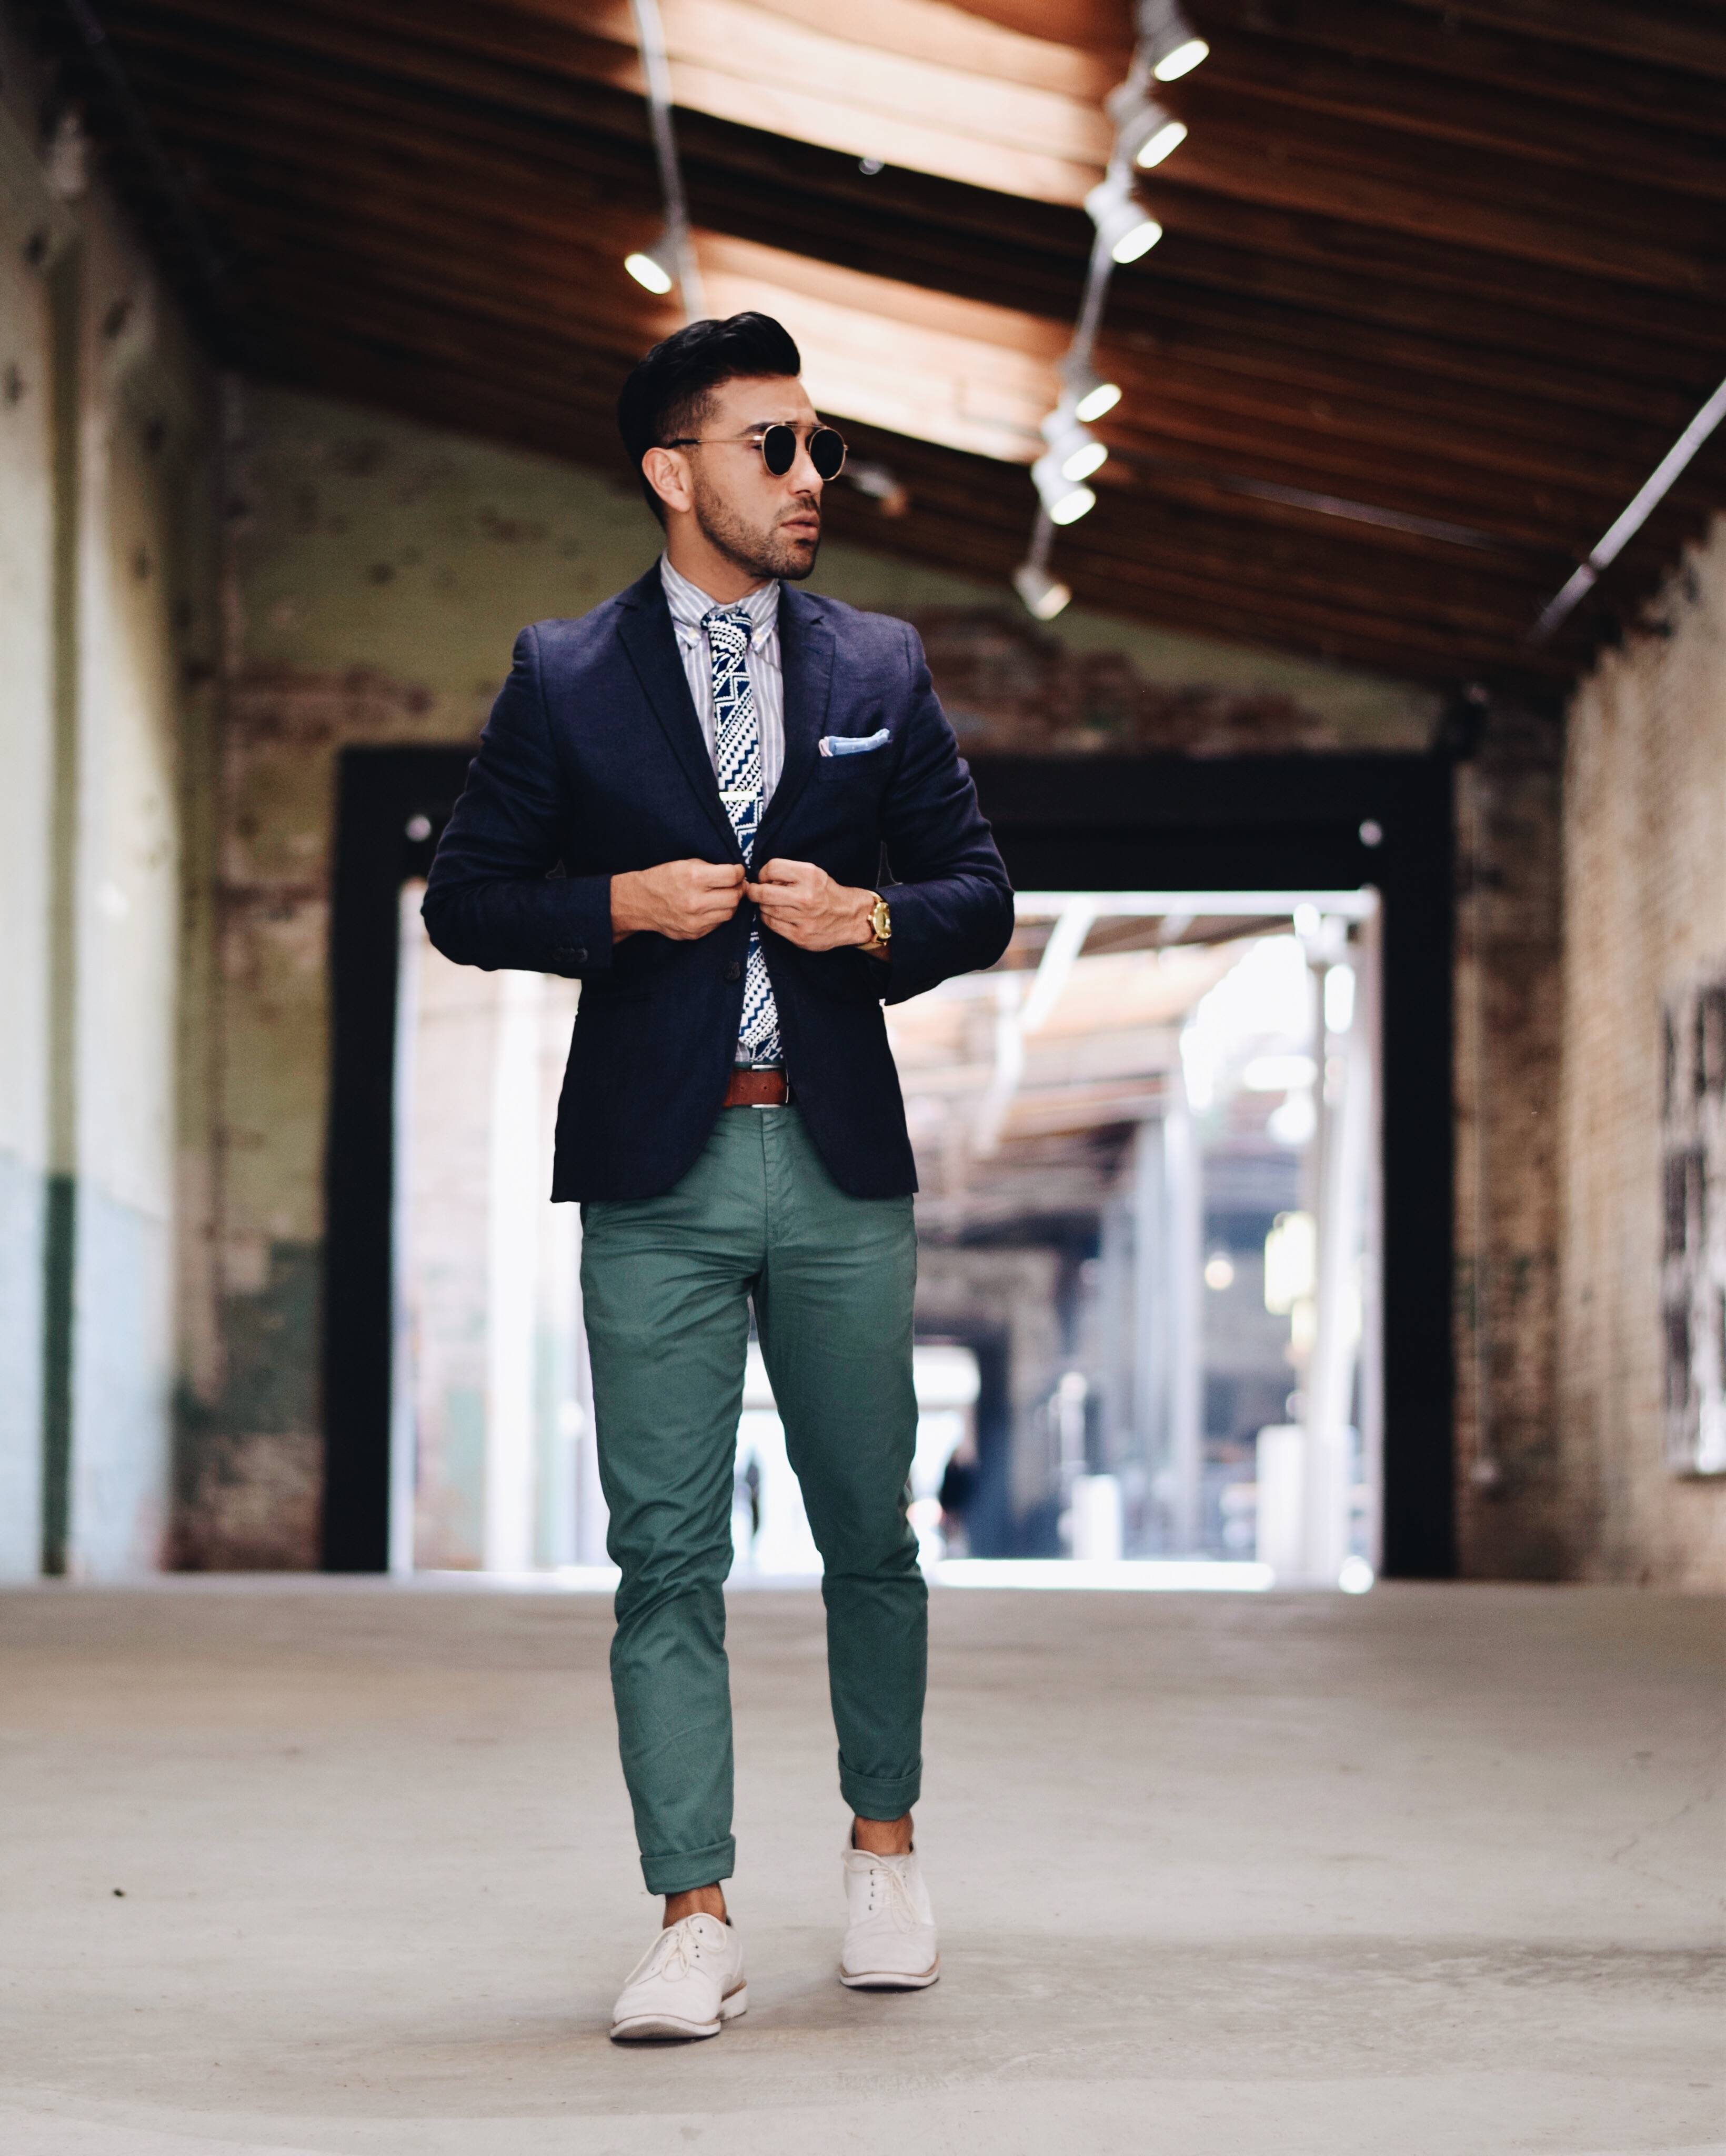 HOW TO: WEAR COLOR CHINOS – RULE OF THUMBS